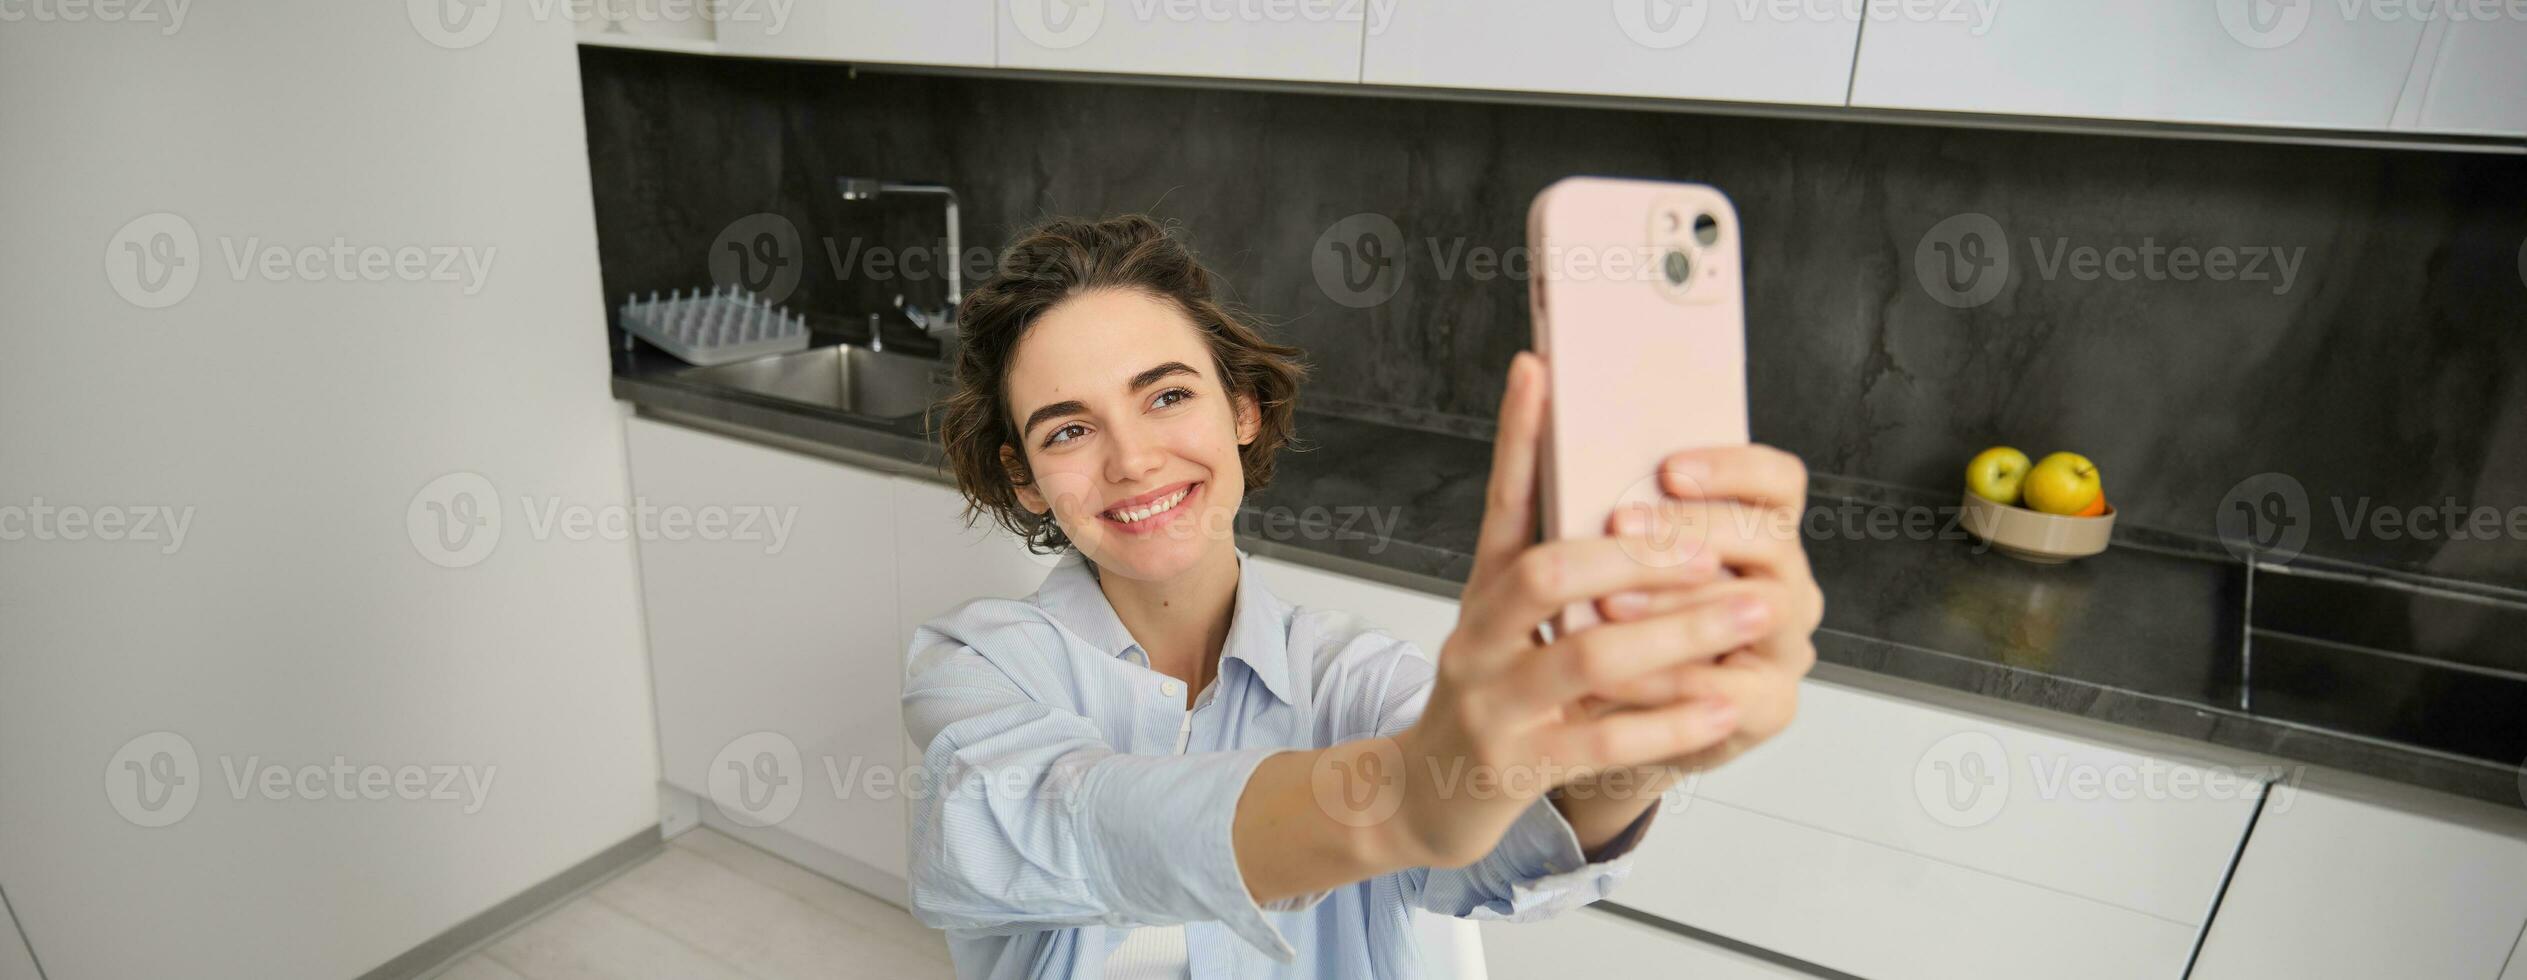 Stylish smiling girl takes selfie on smartphone at home, makes photo of herself in kitchen, poses for picture with mobile phone